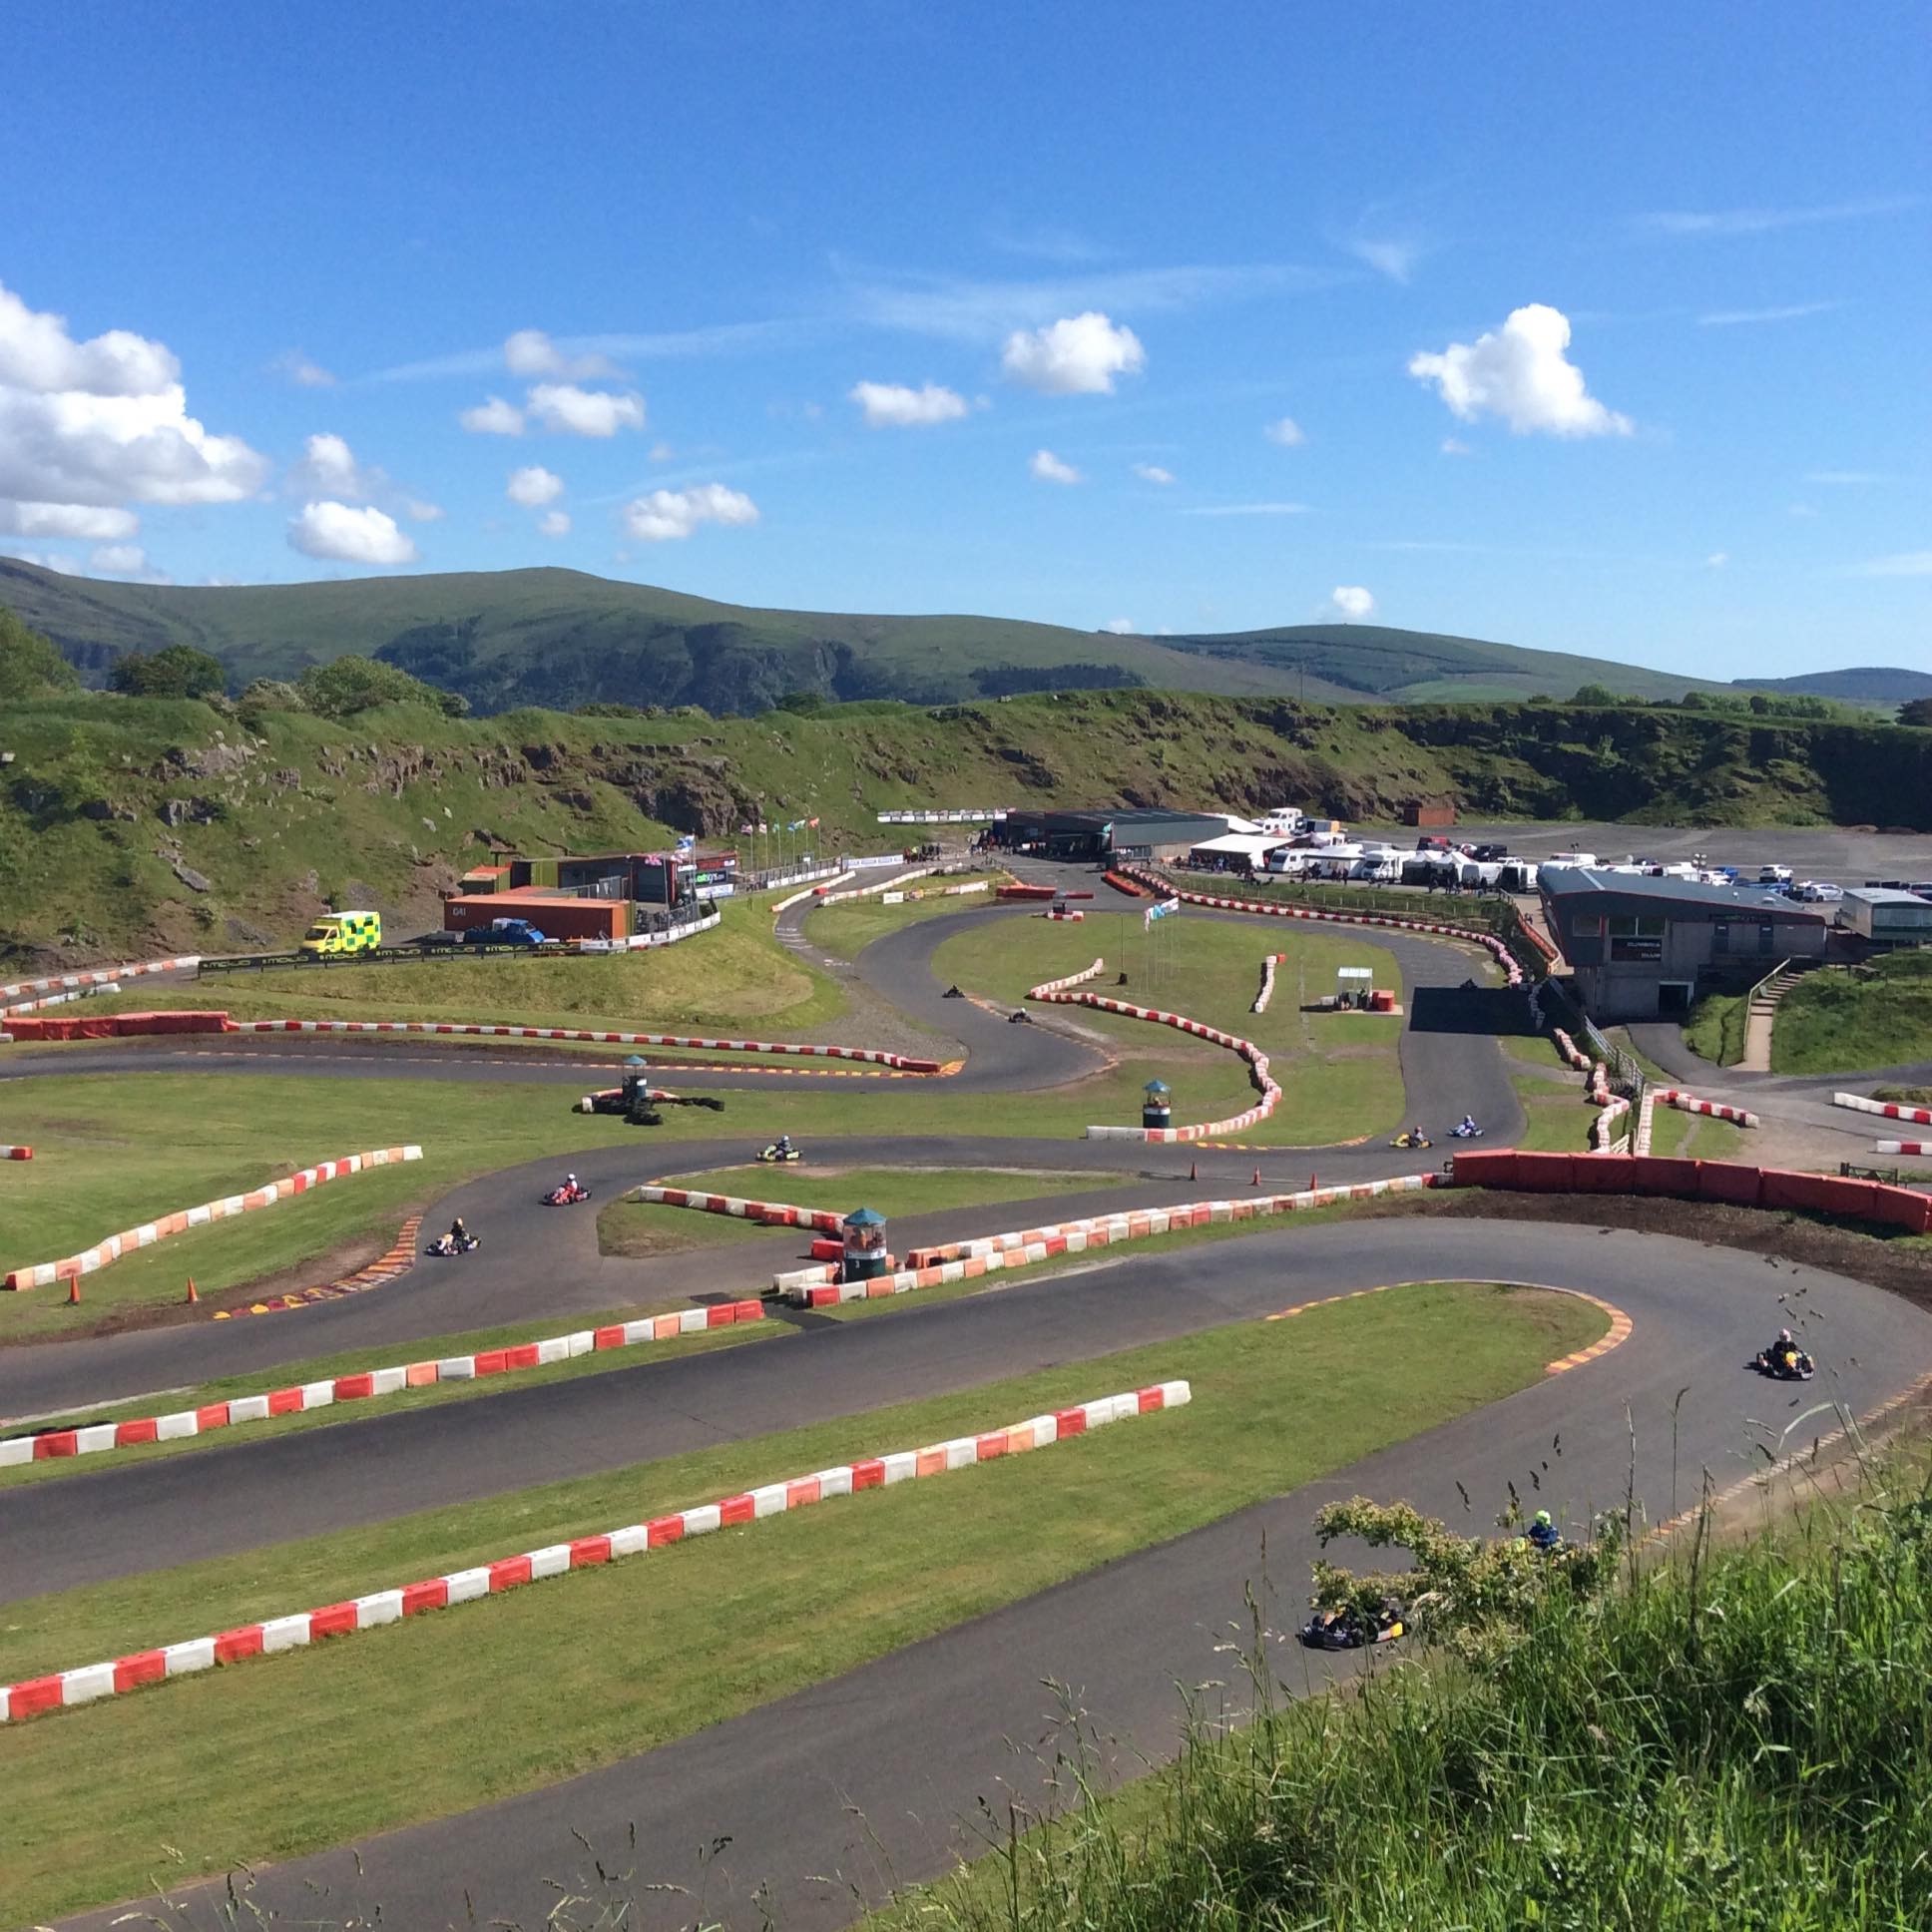 Race Circuit for the start of the season: 